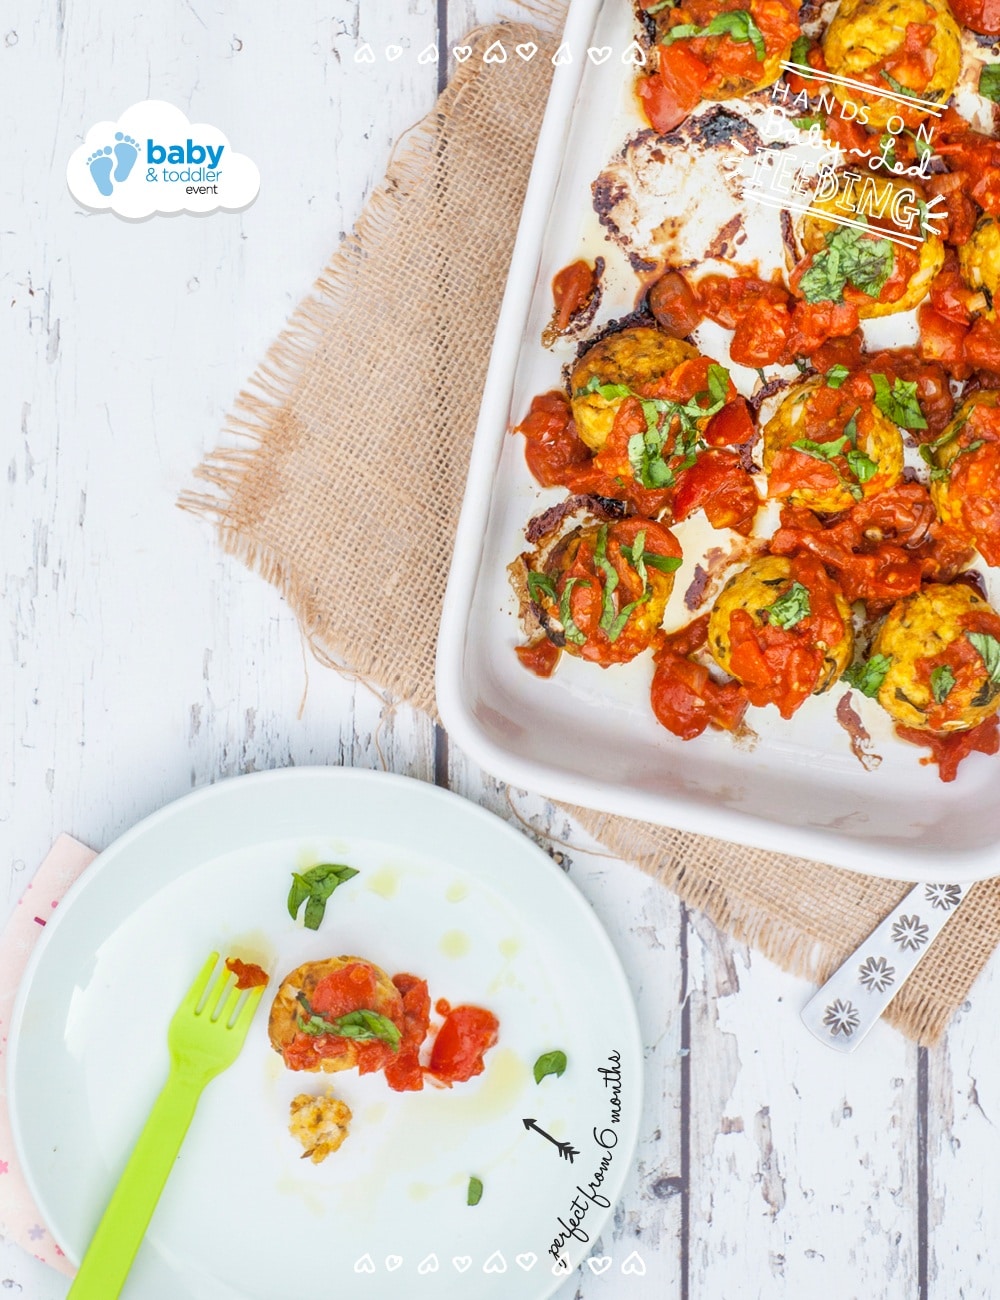 Moroccan Turkey Meatballs. Recipe image for recipe. Homemade Baby Food Recipes perfect for little hands. Delicious baby weaning recipe from Aileen Cox Blundell author of The Baby Led Feeding Cookbook.